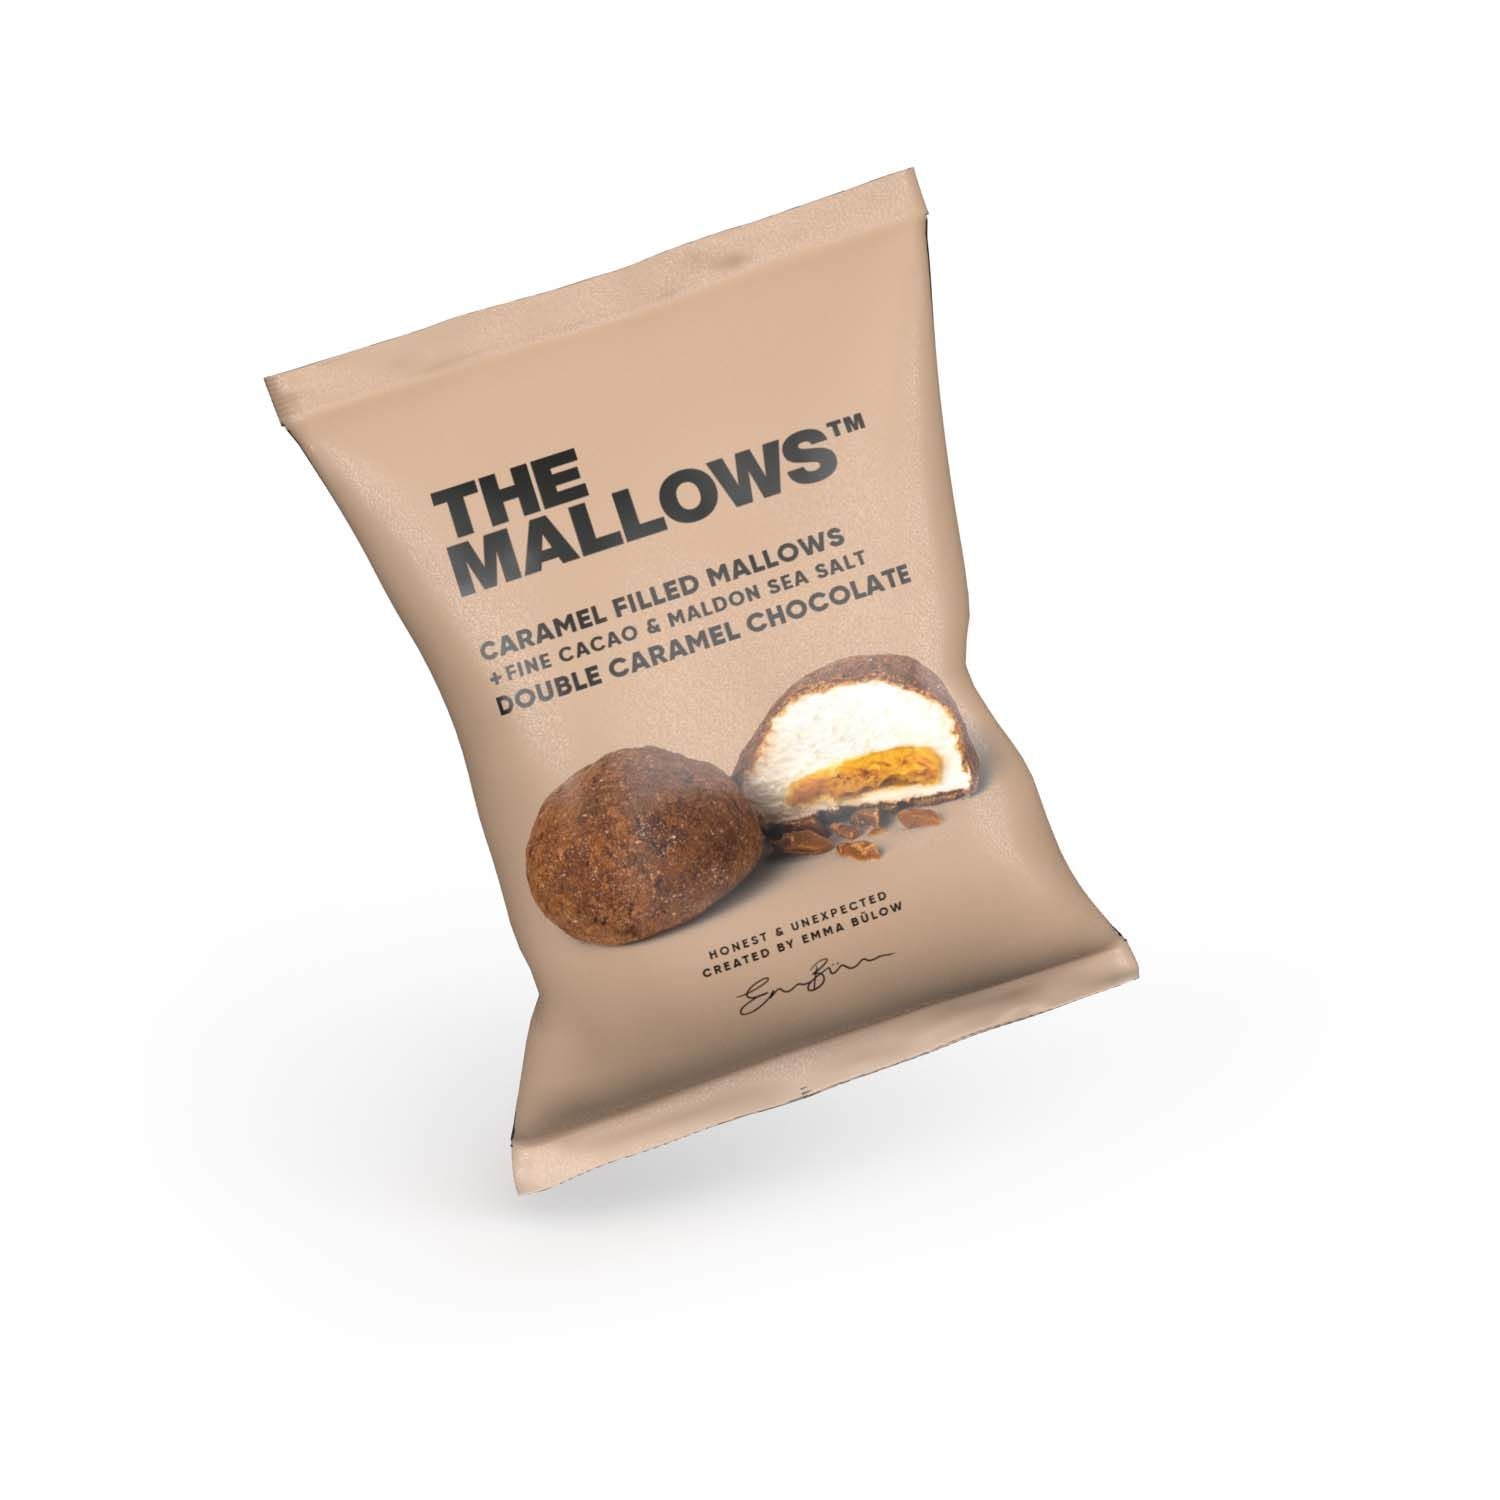 The Mallows Marshmallows With Caramel Filling & Chocolate Double Caramel Chocolate, 18g